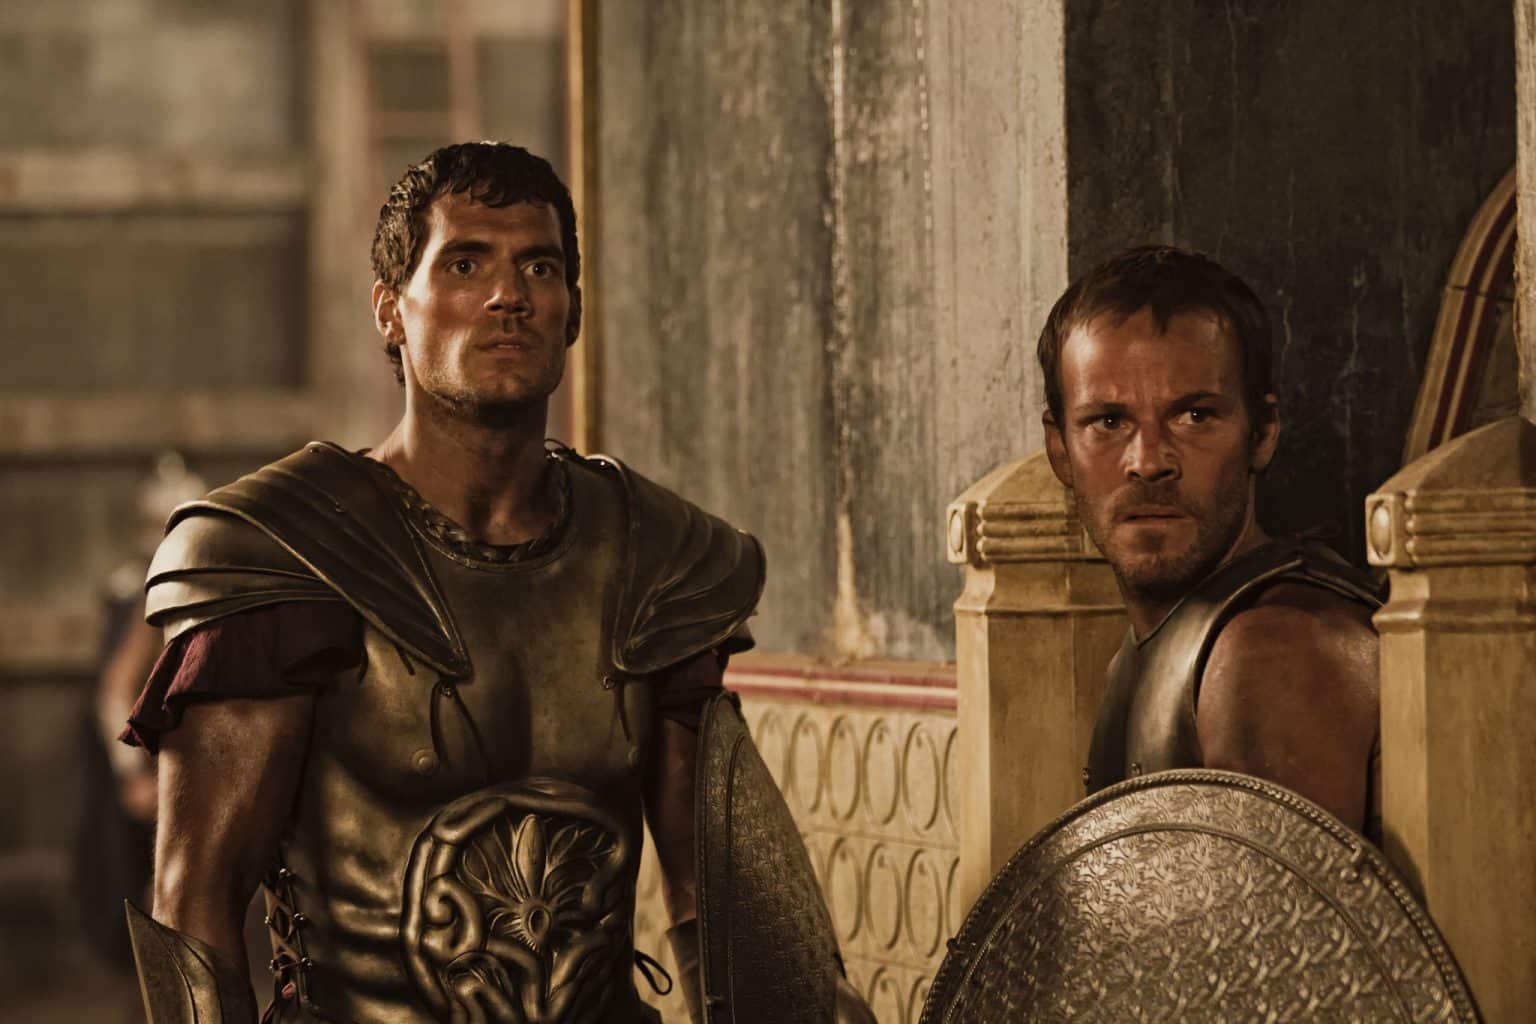 10 Best Greek Mythology Movies to Watch in 2022